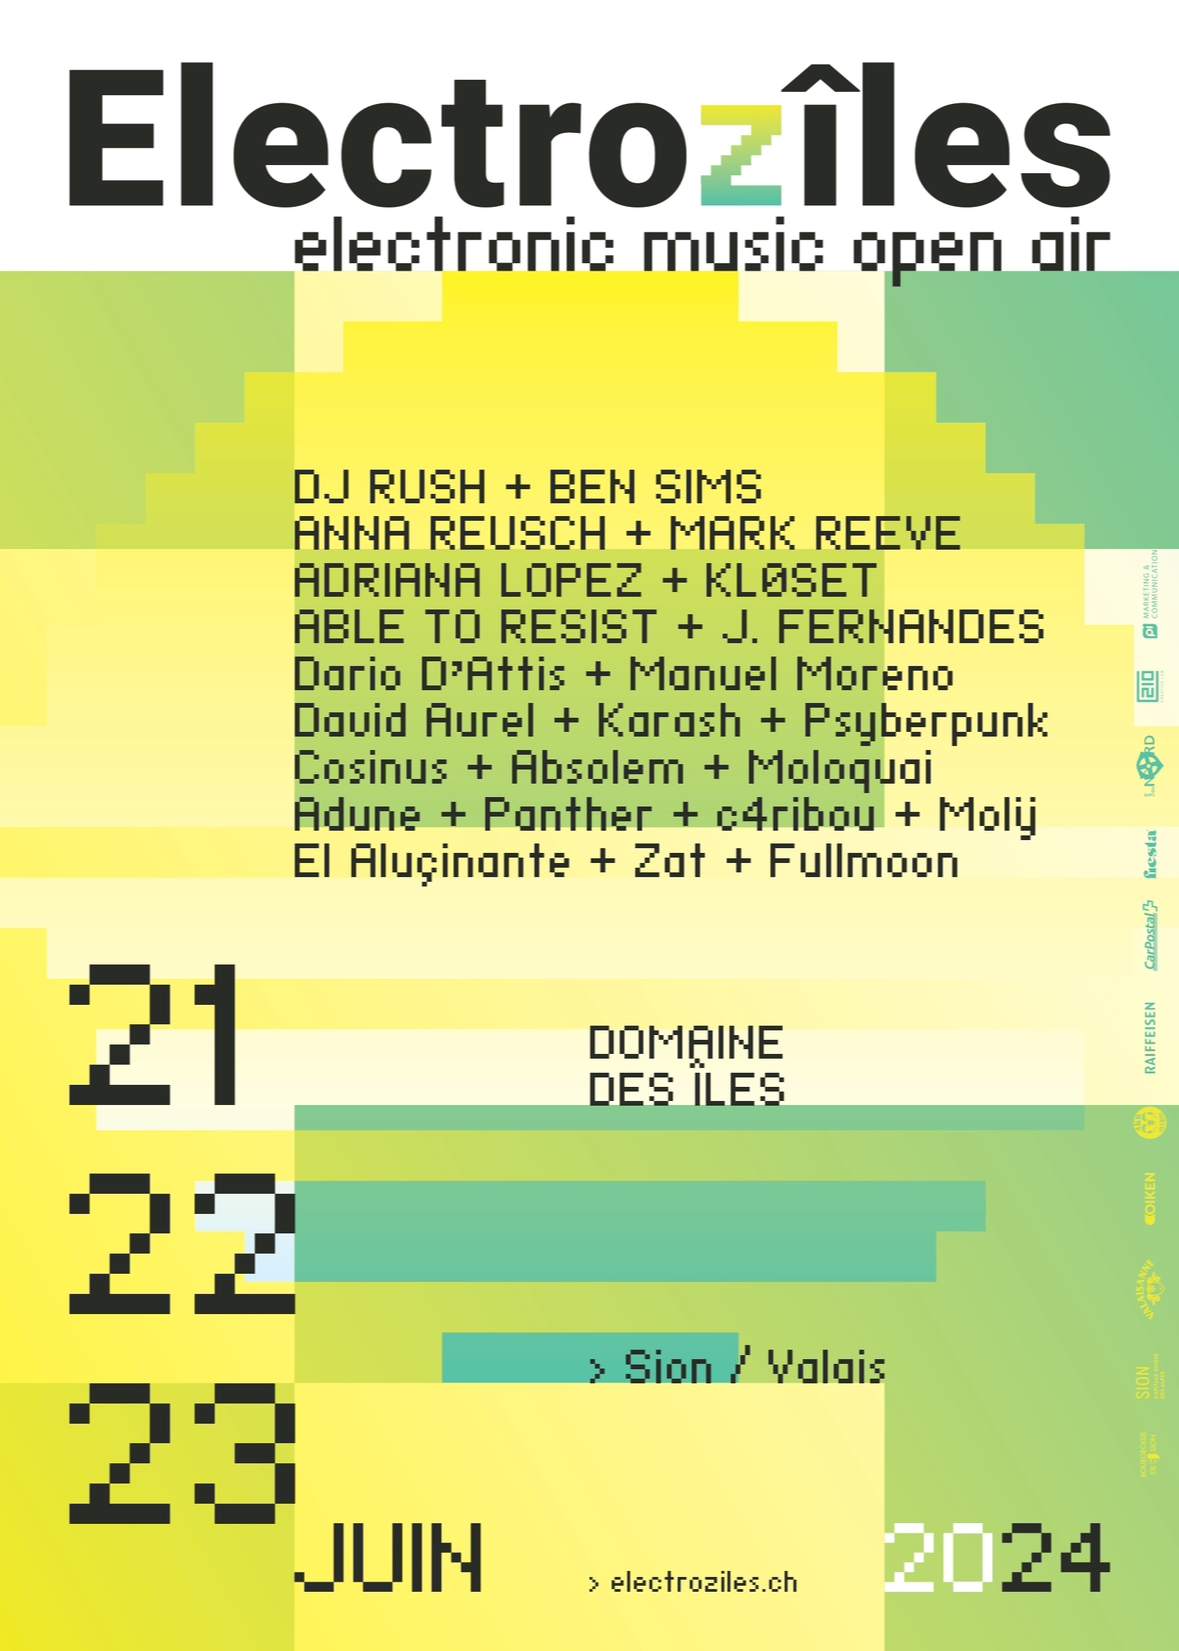 Electroziles Festival - フライヤー表